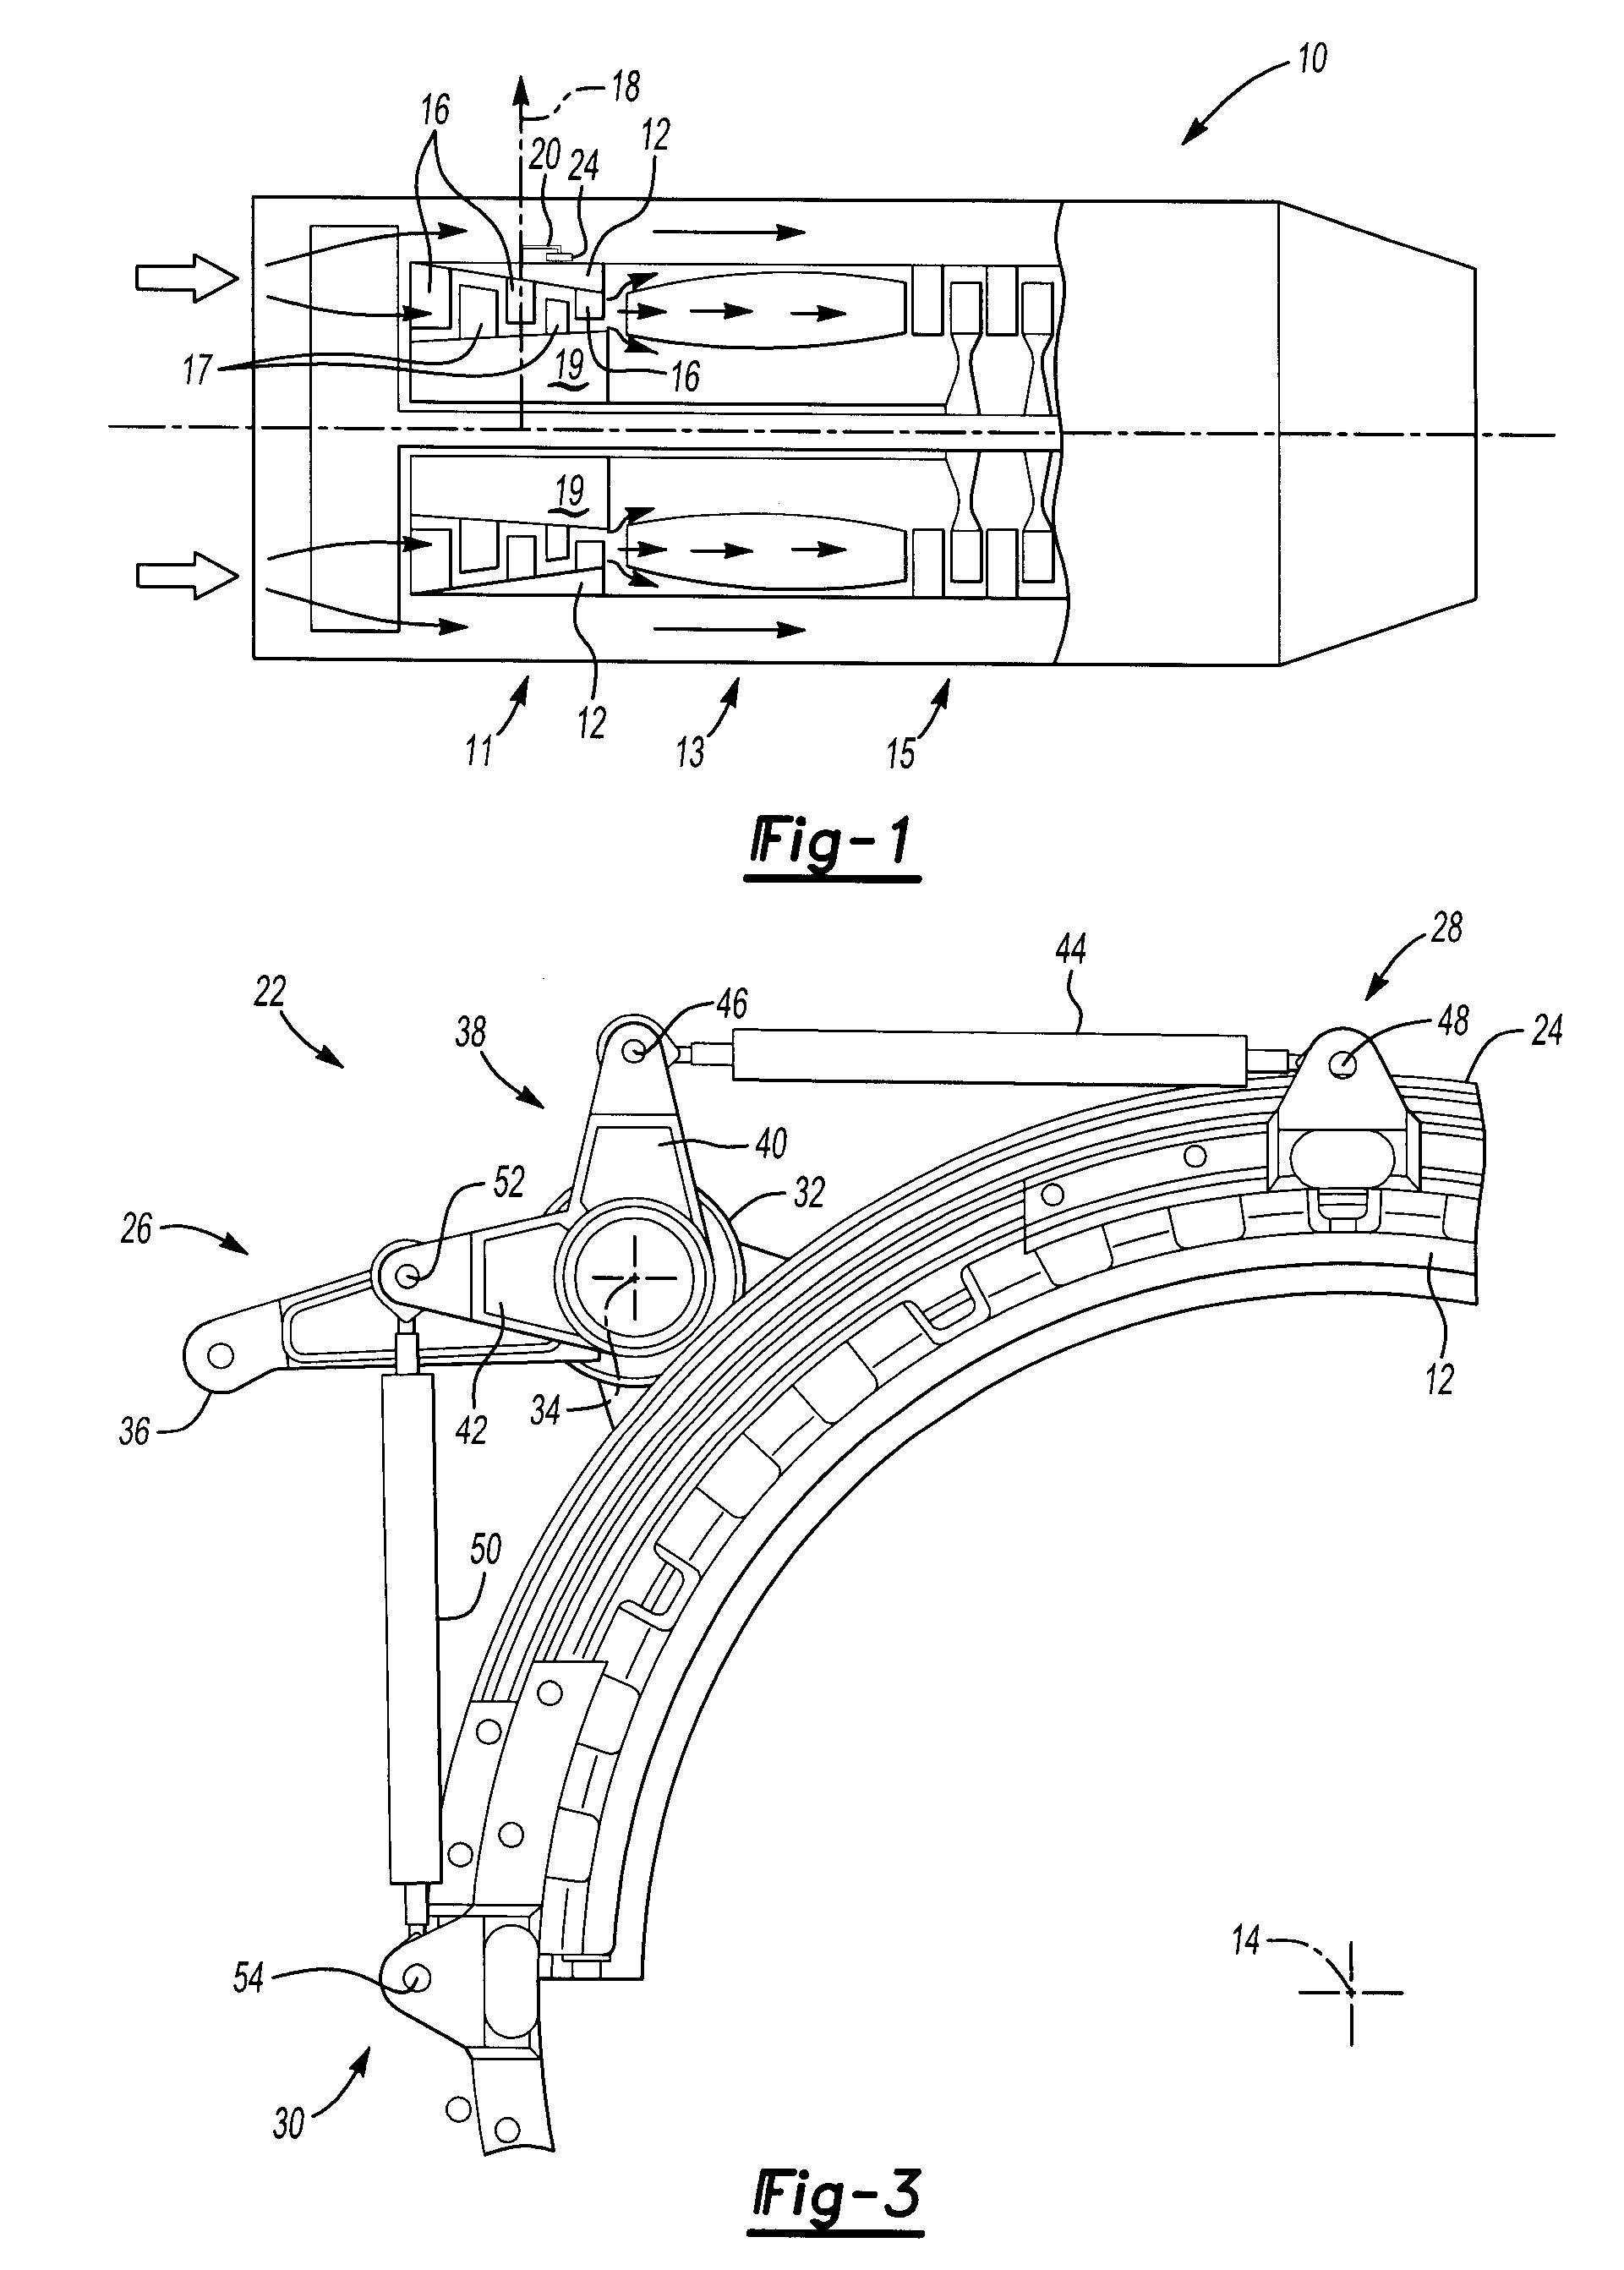 Variable vane actuation system